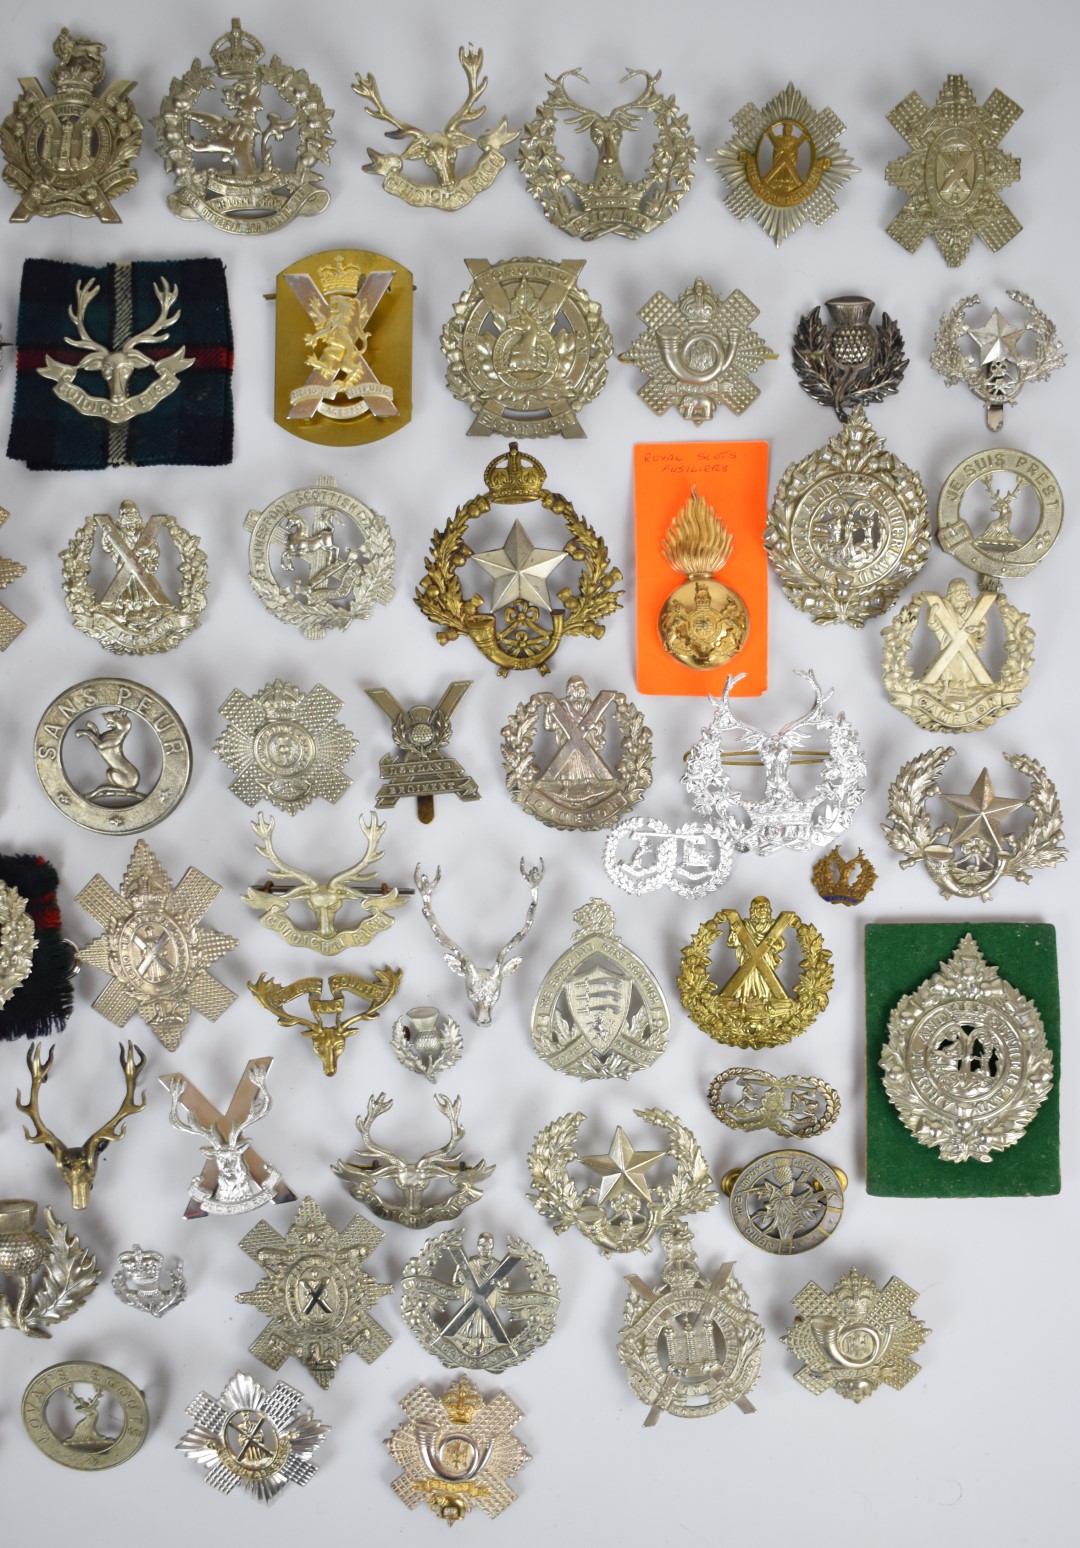 Collection of approximately 60 British Army Scottish Regiment badges including Royal Scots Guards, - Image 3 of 6